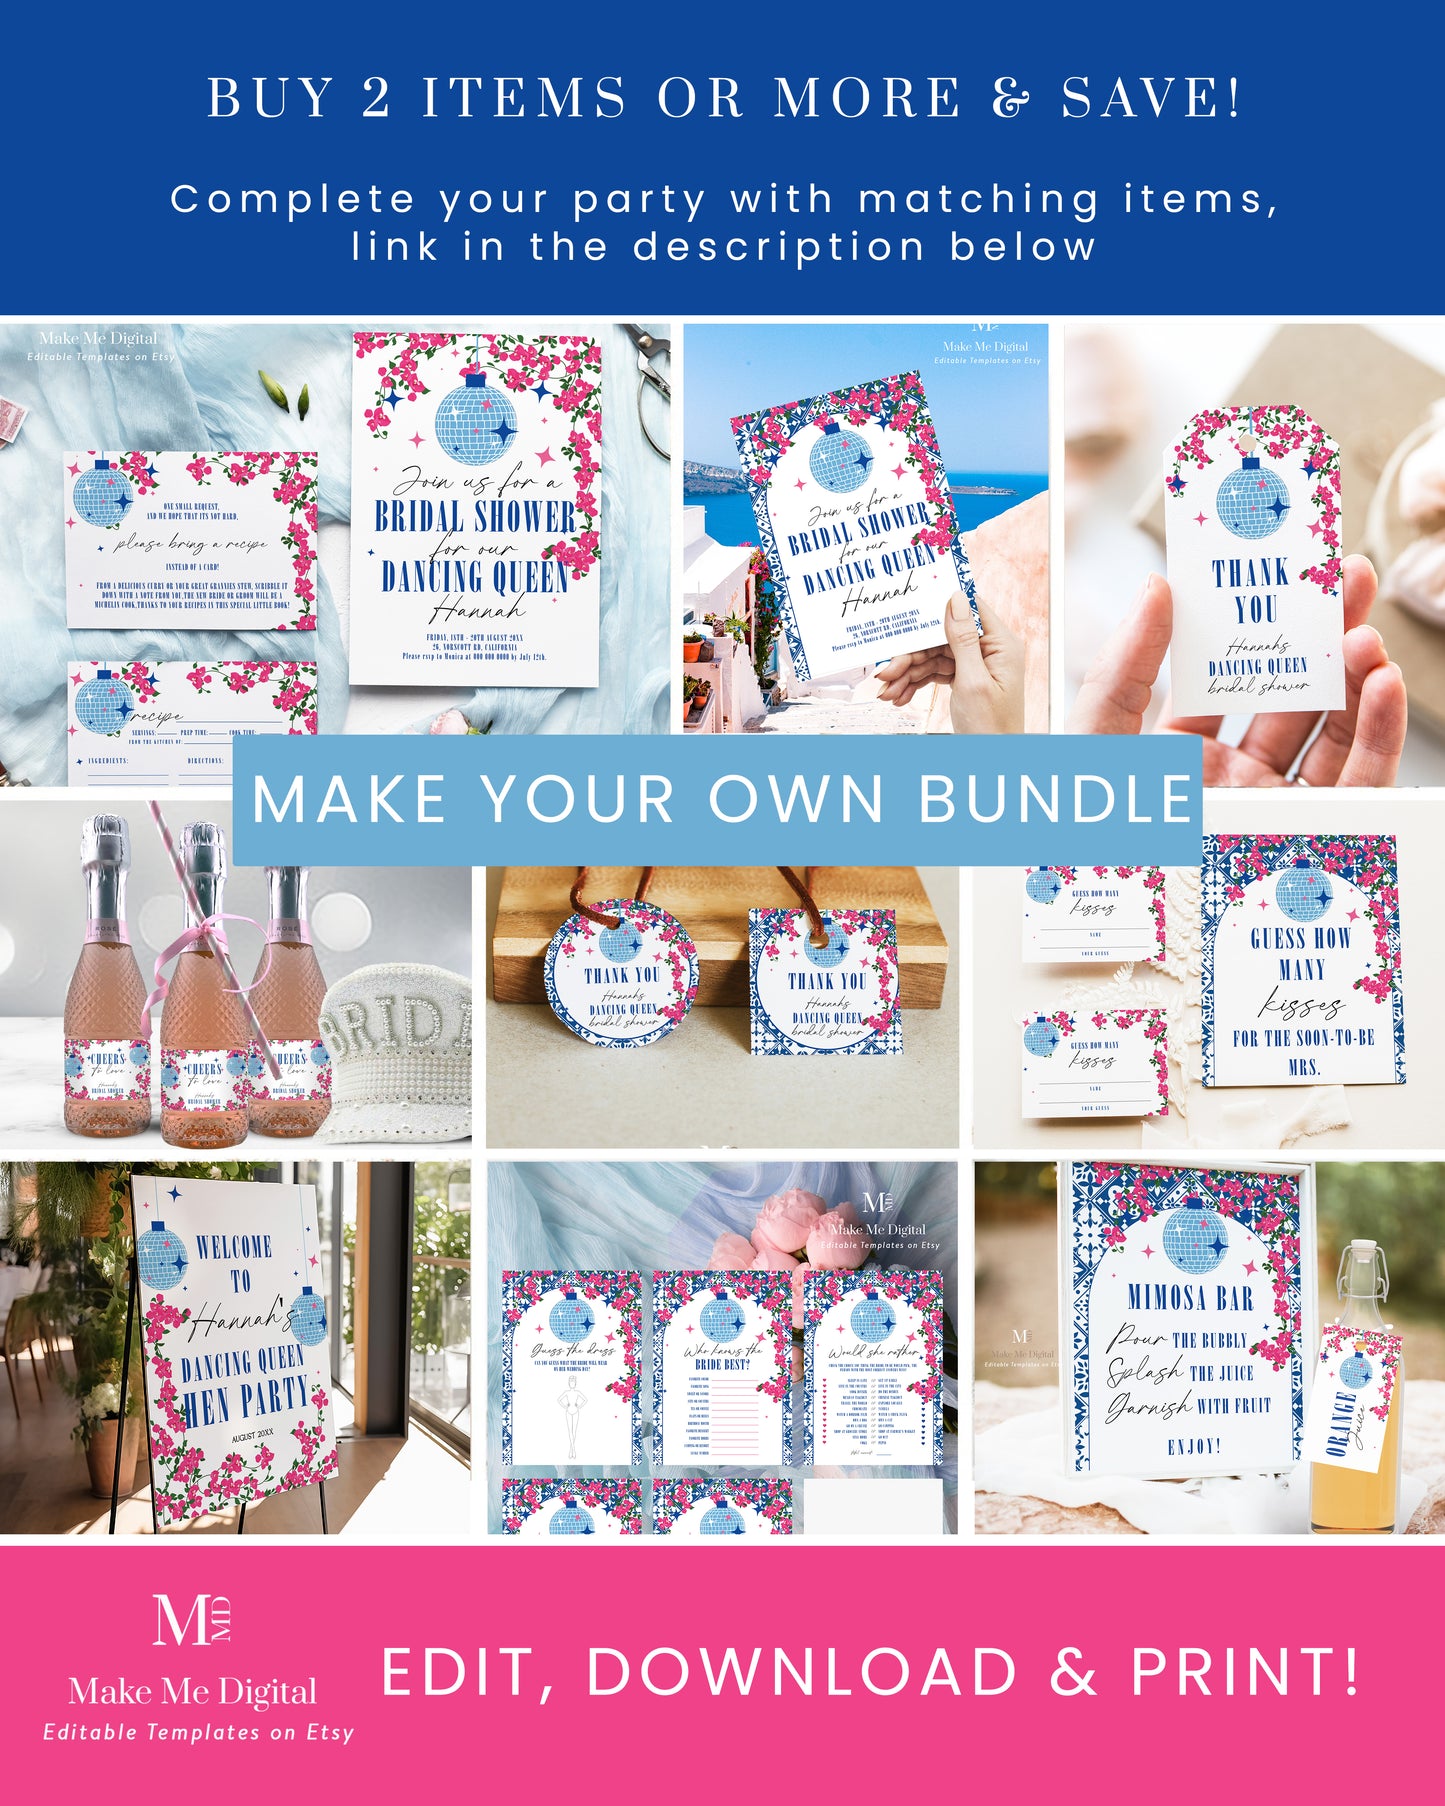 Mamma Mia Arch Hen Party Welcome Sign & Mediterranean Blue Tile template